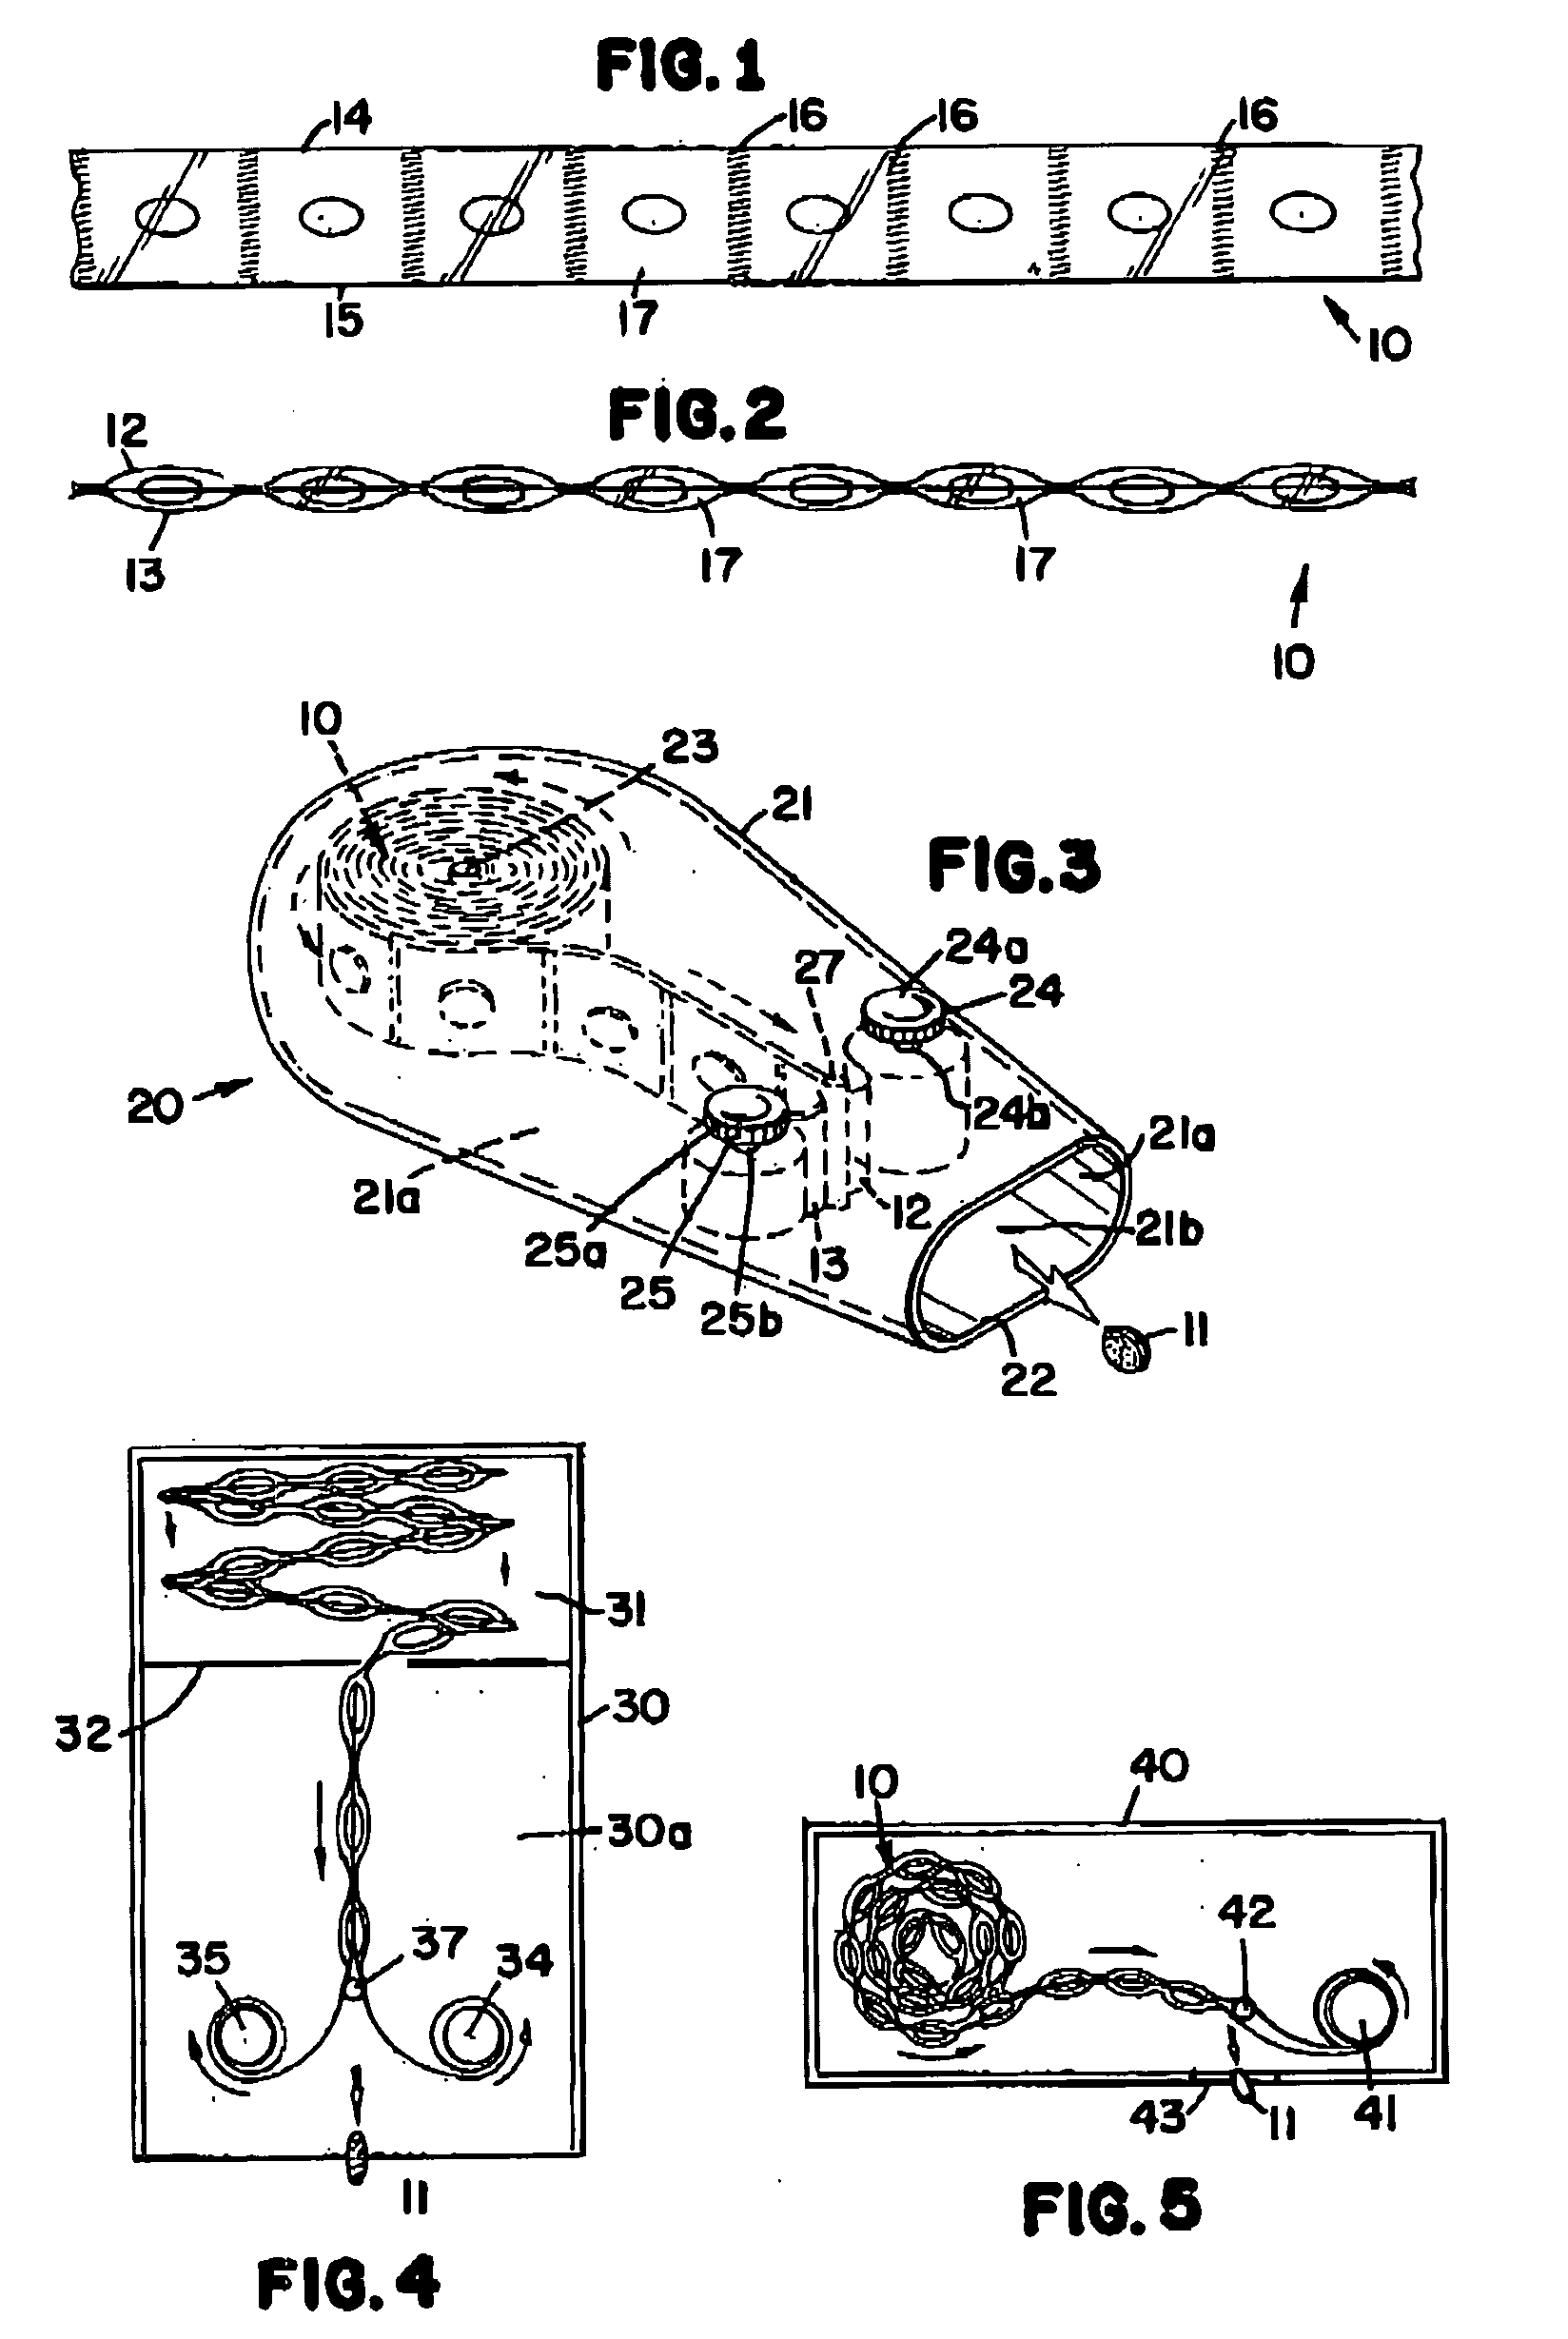 Method and apparatus for using a unit dose dispenser